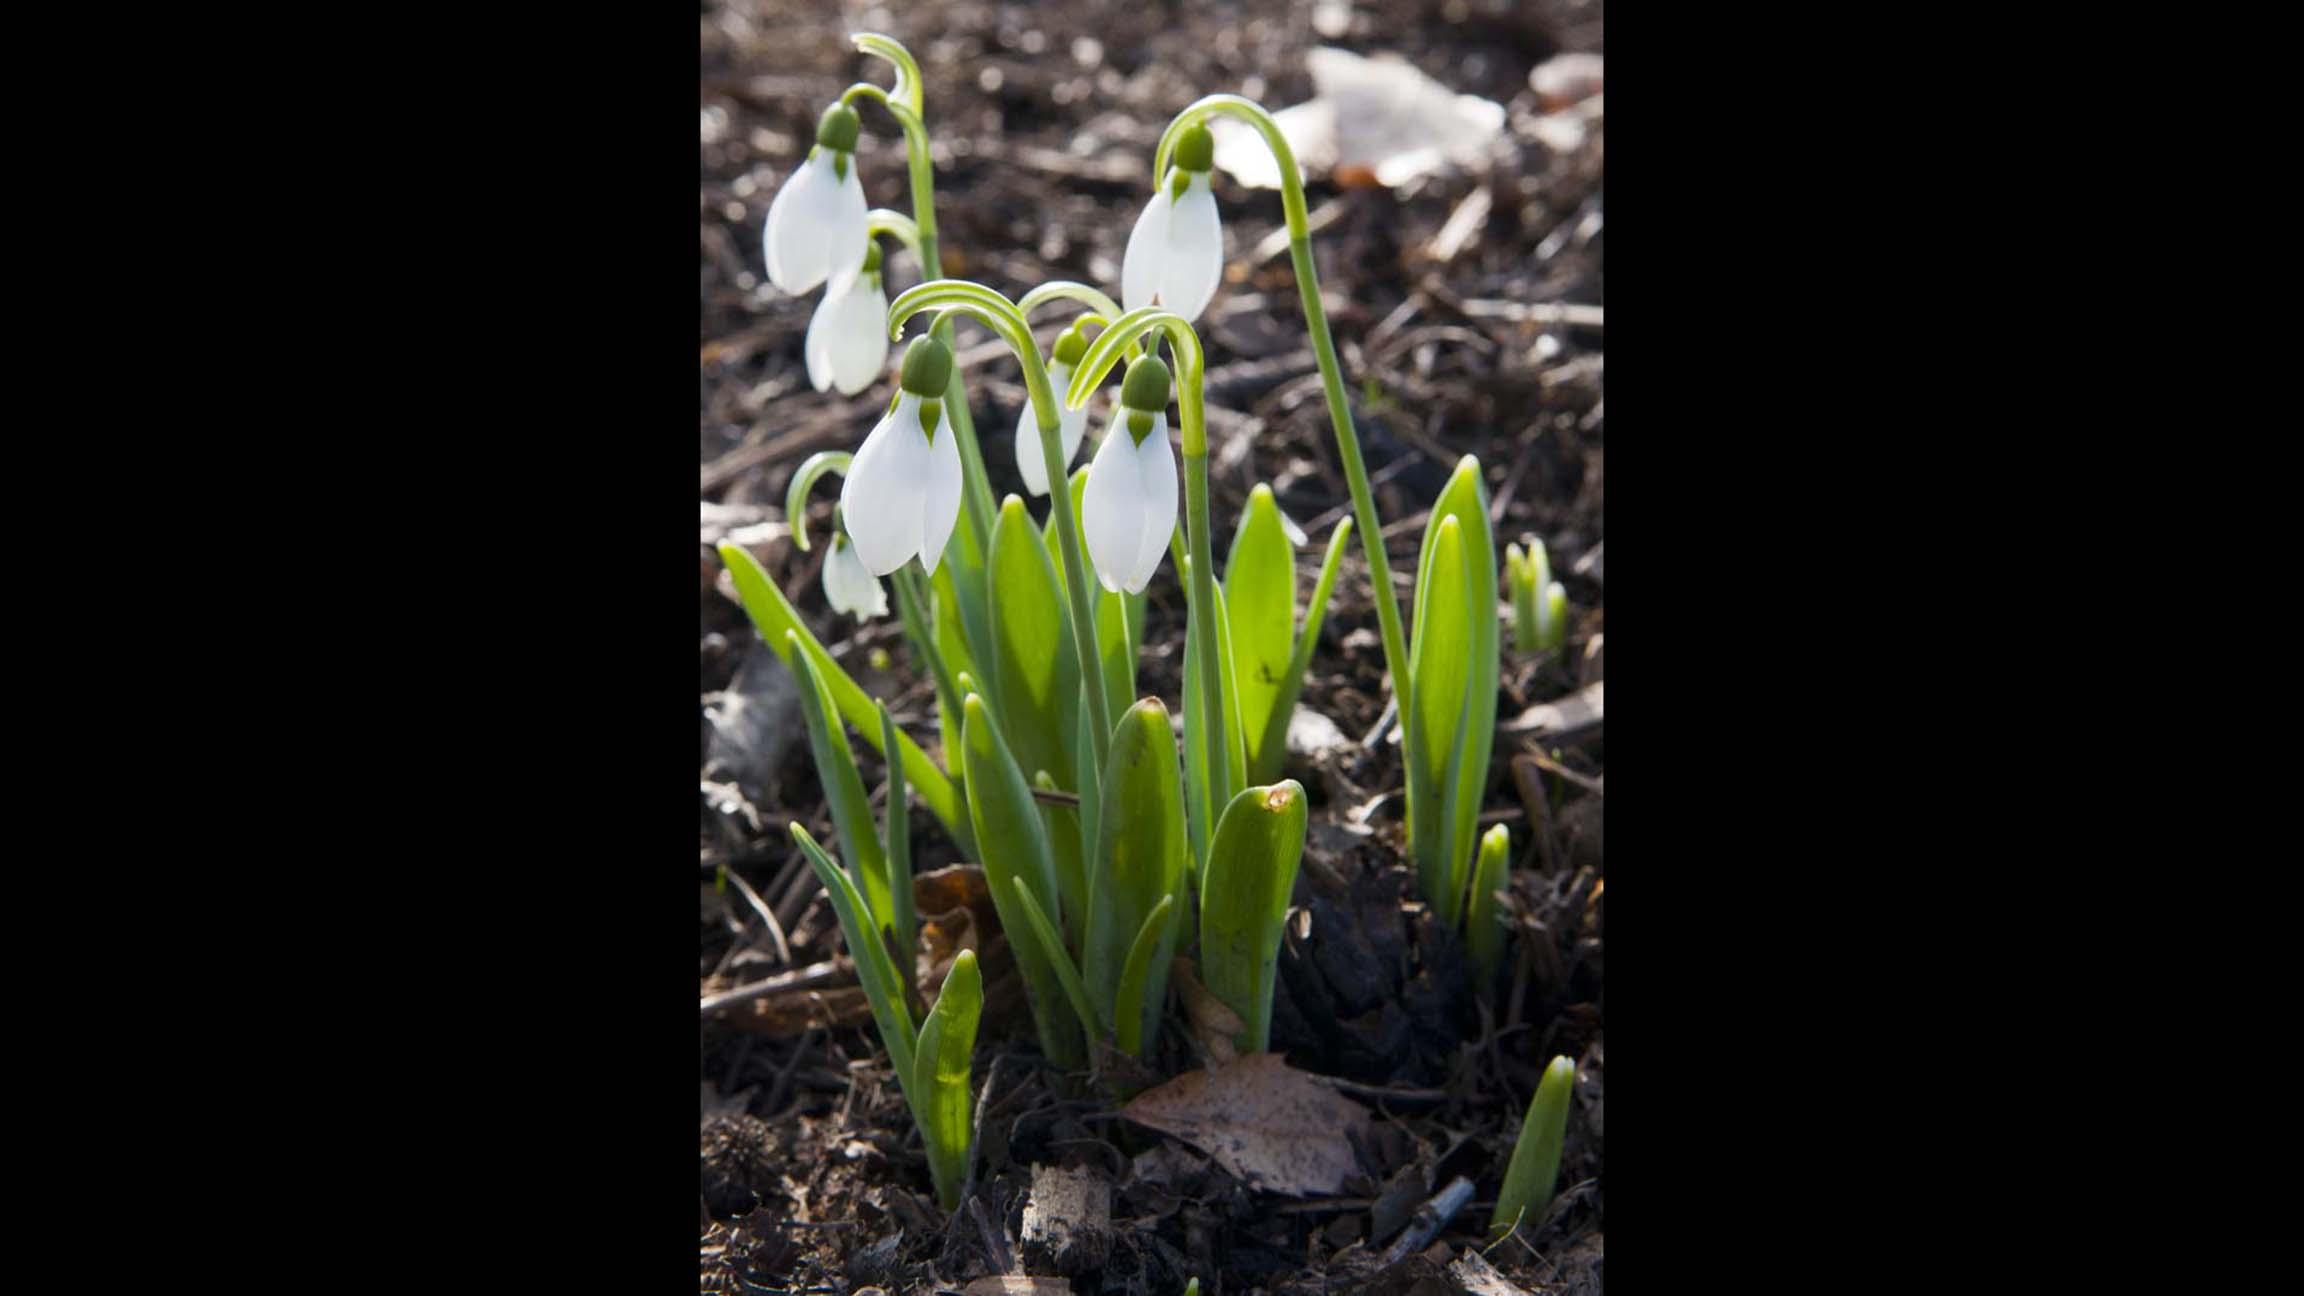 In the coming days, giant snowdrops at the Botanic Garden will look like this one from a previous year, Tankersley said. (Courtesy Chicago Botanic Garden)